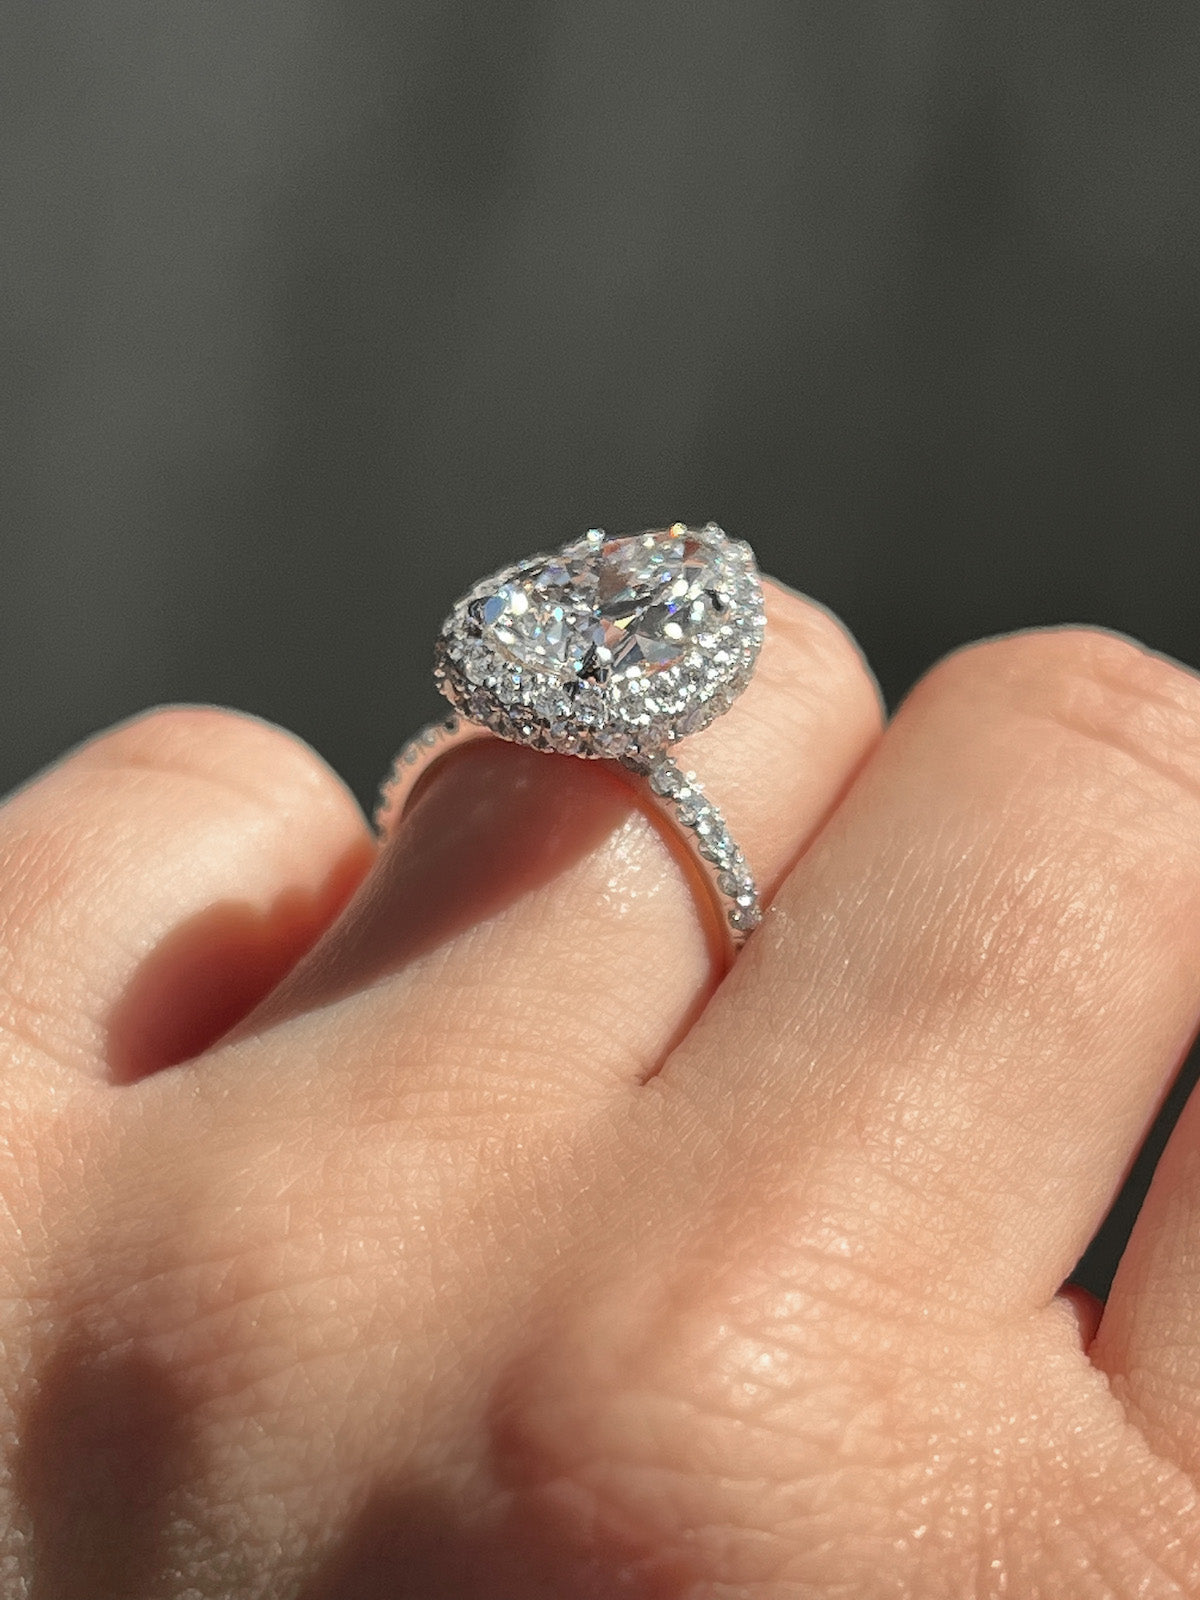 Engagement Ring Wednesday | 3.03 Pear Cut Lab Created Diamond Engagement Ring - Happy Jewelers Fine Jewelry Lifetime Warranty